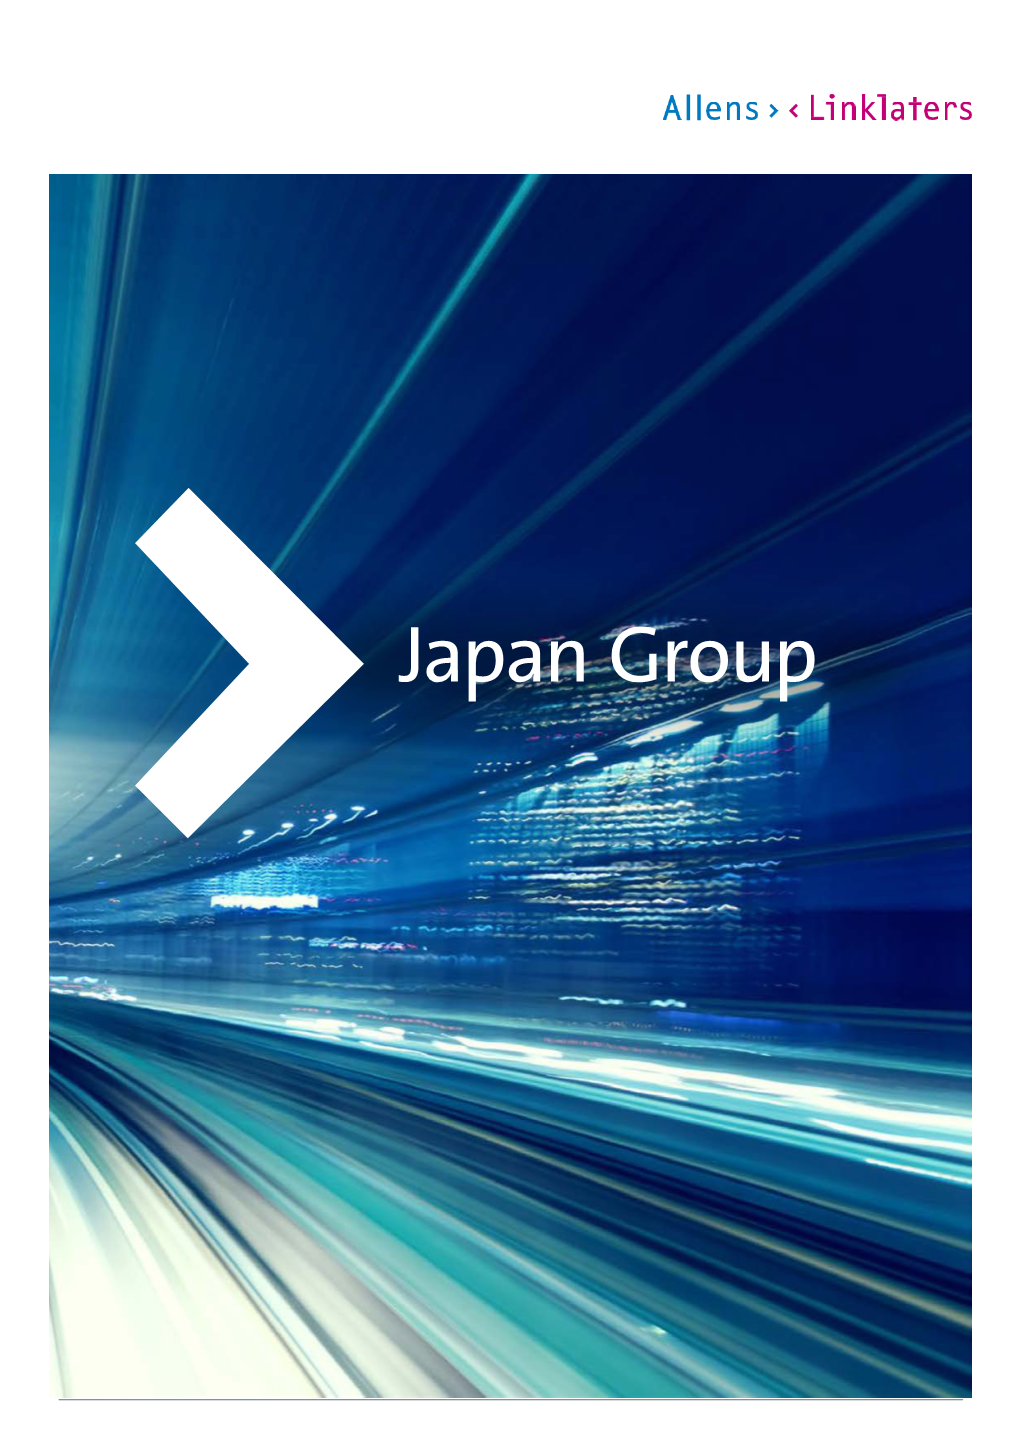 Japan Group ABOUT ALLENS